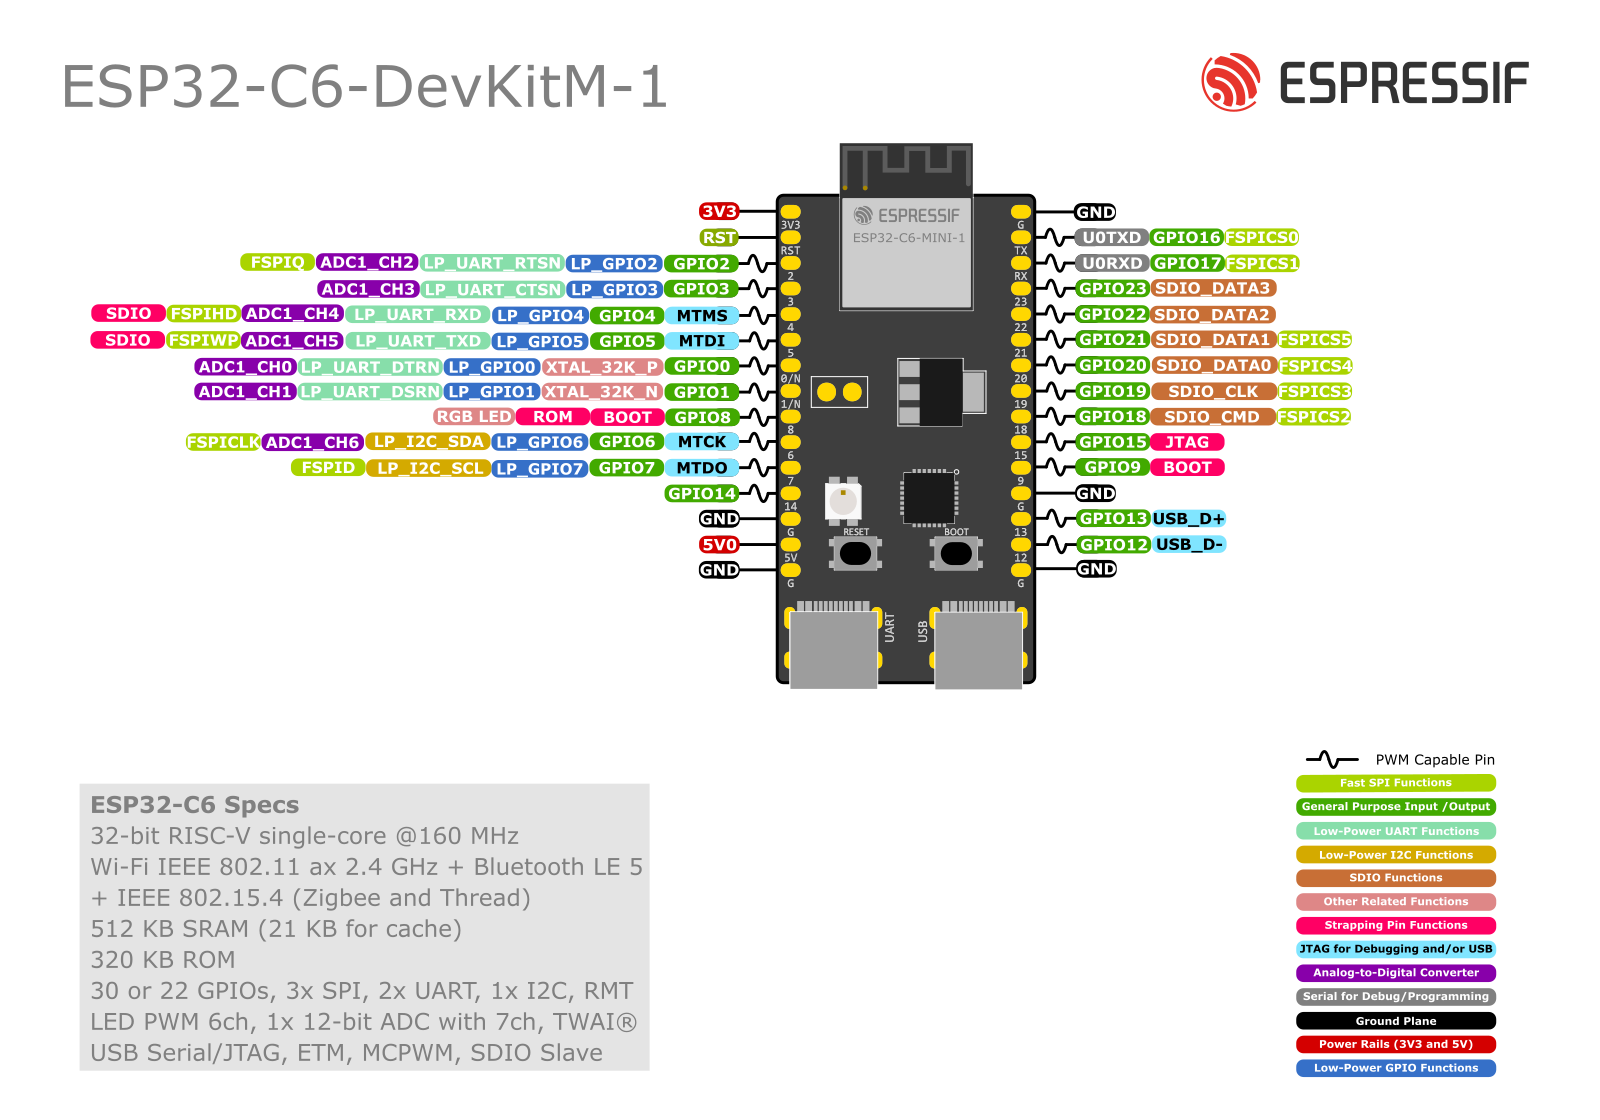 ESP32-C6-DevKitM-1 Pin Layout (click to enlarge)